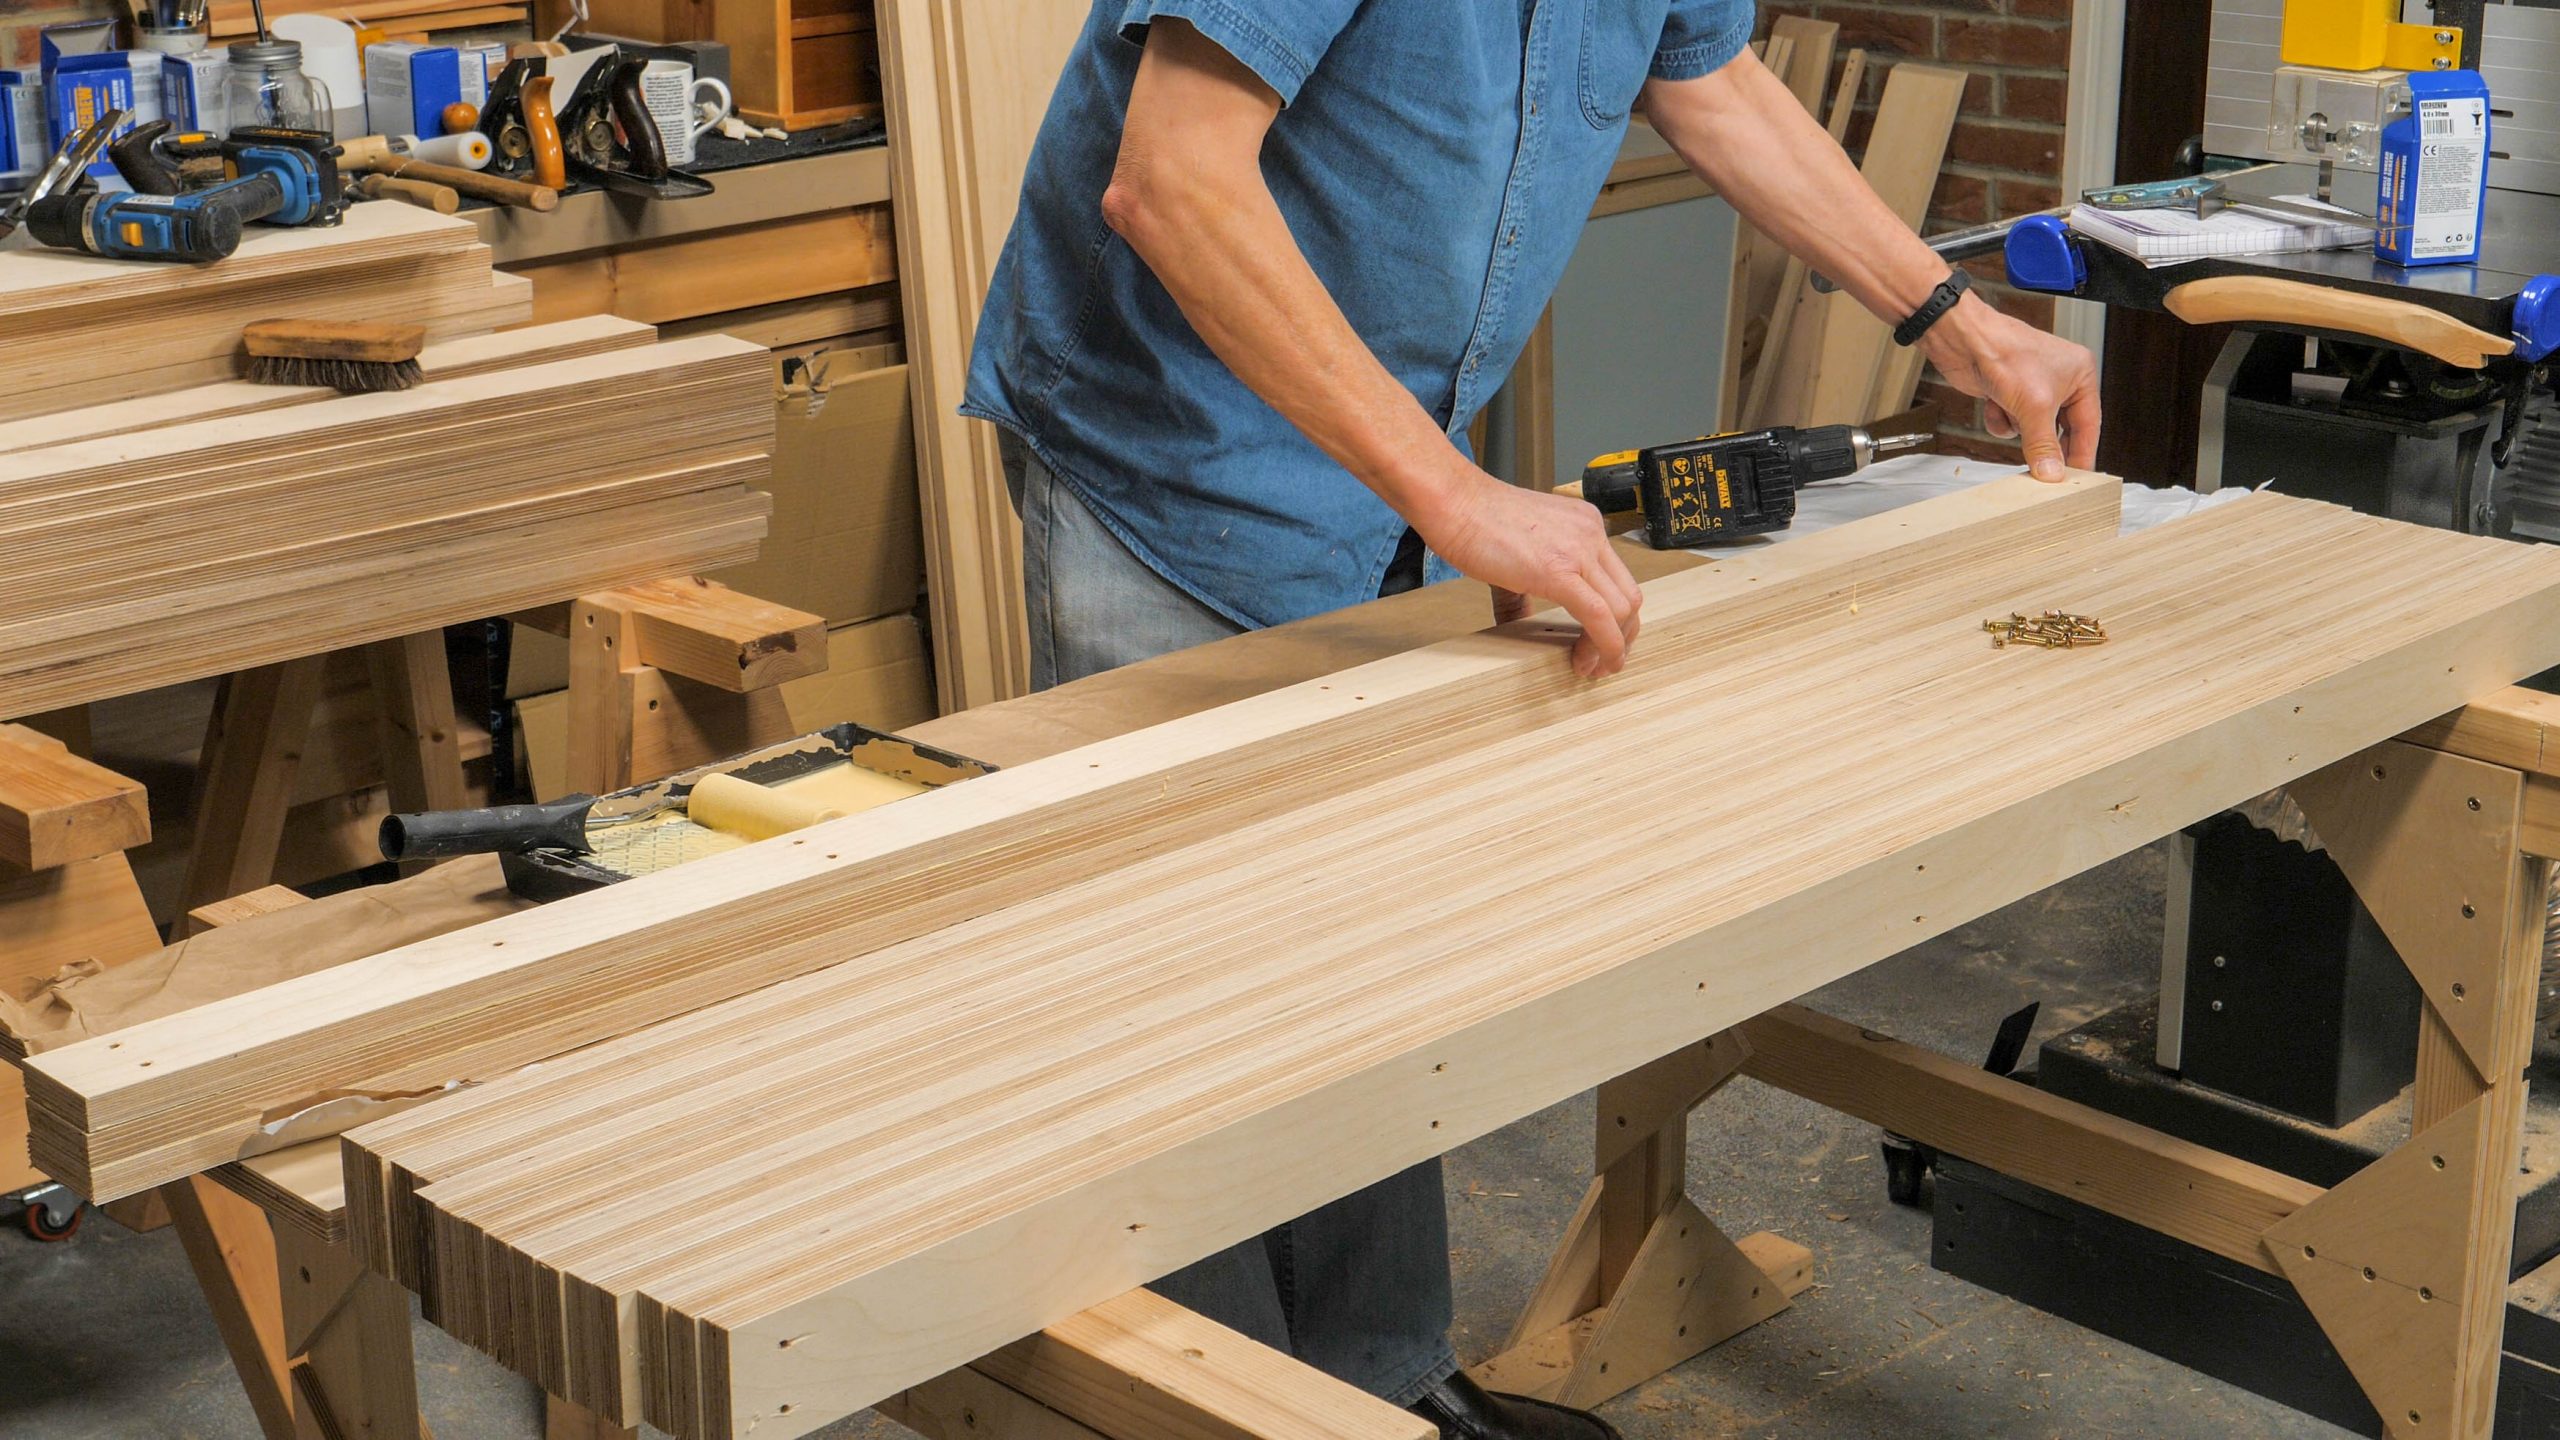 Turning flat plywood into a box with just four cuts: Rockler's